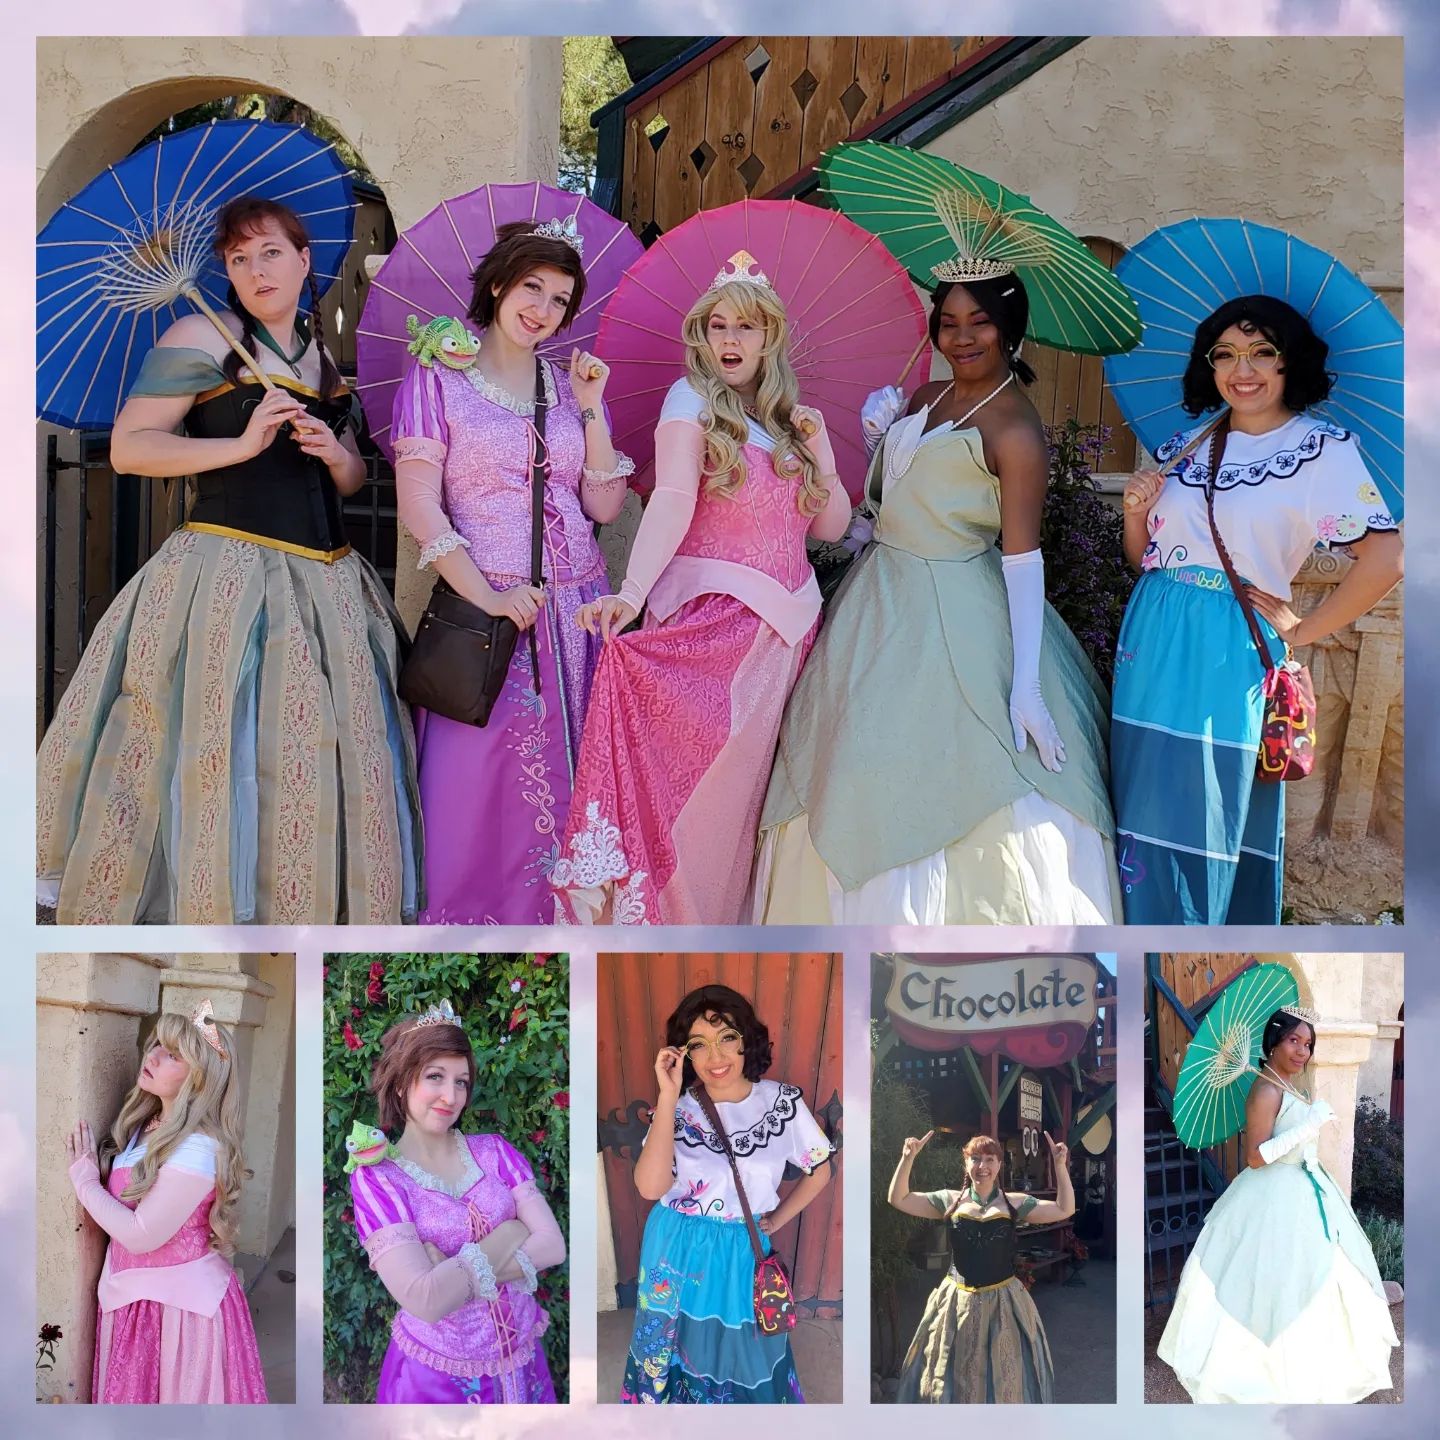 picture of 4 people dresses as Disney princesses with colorful umbrellas